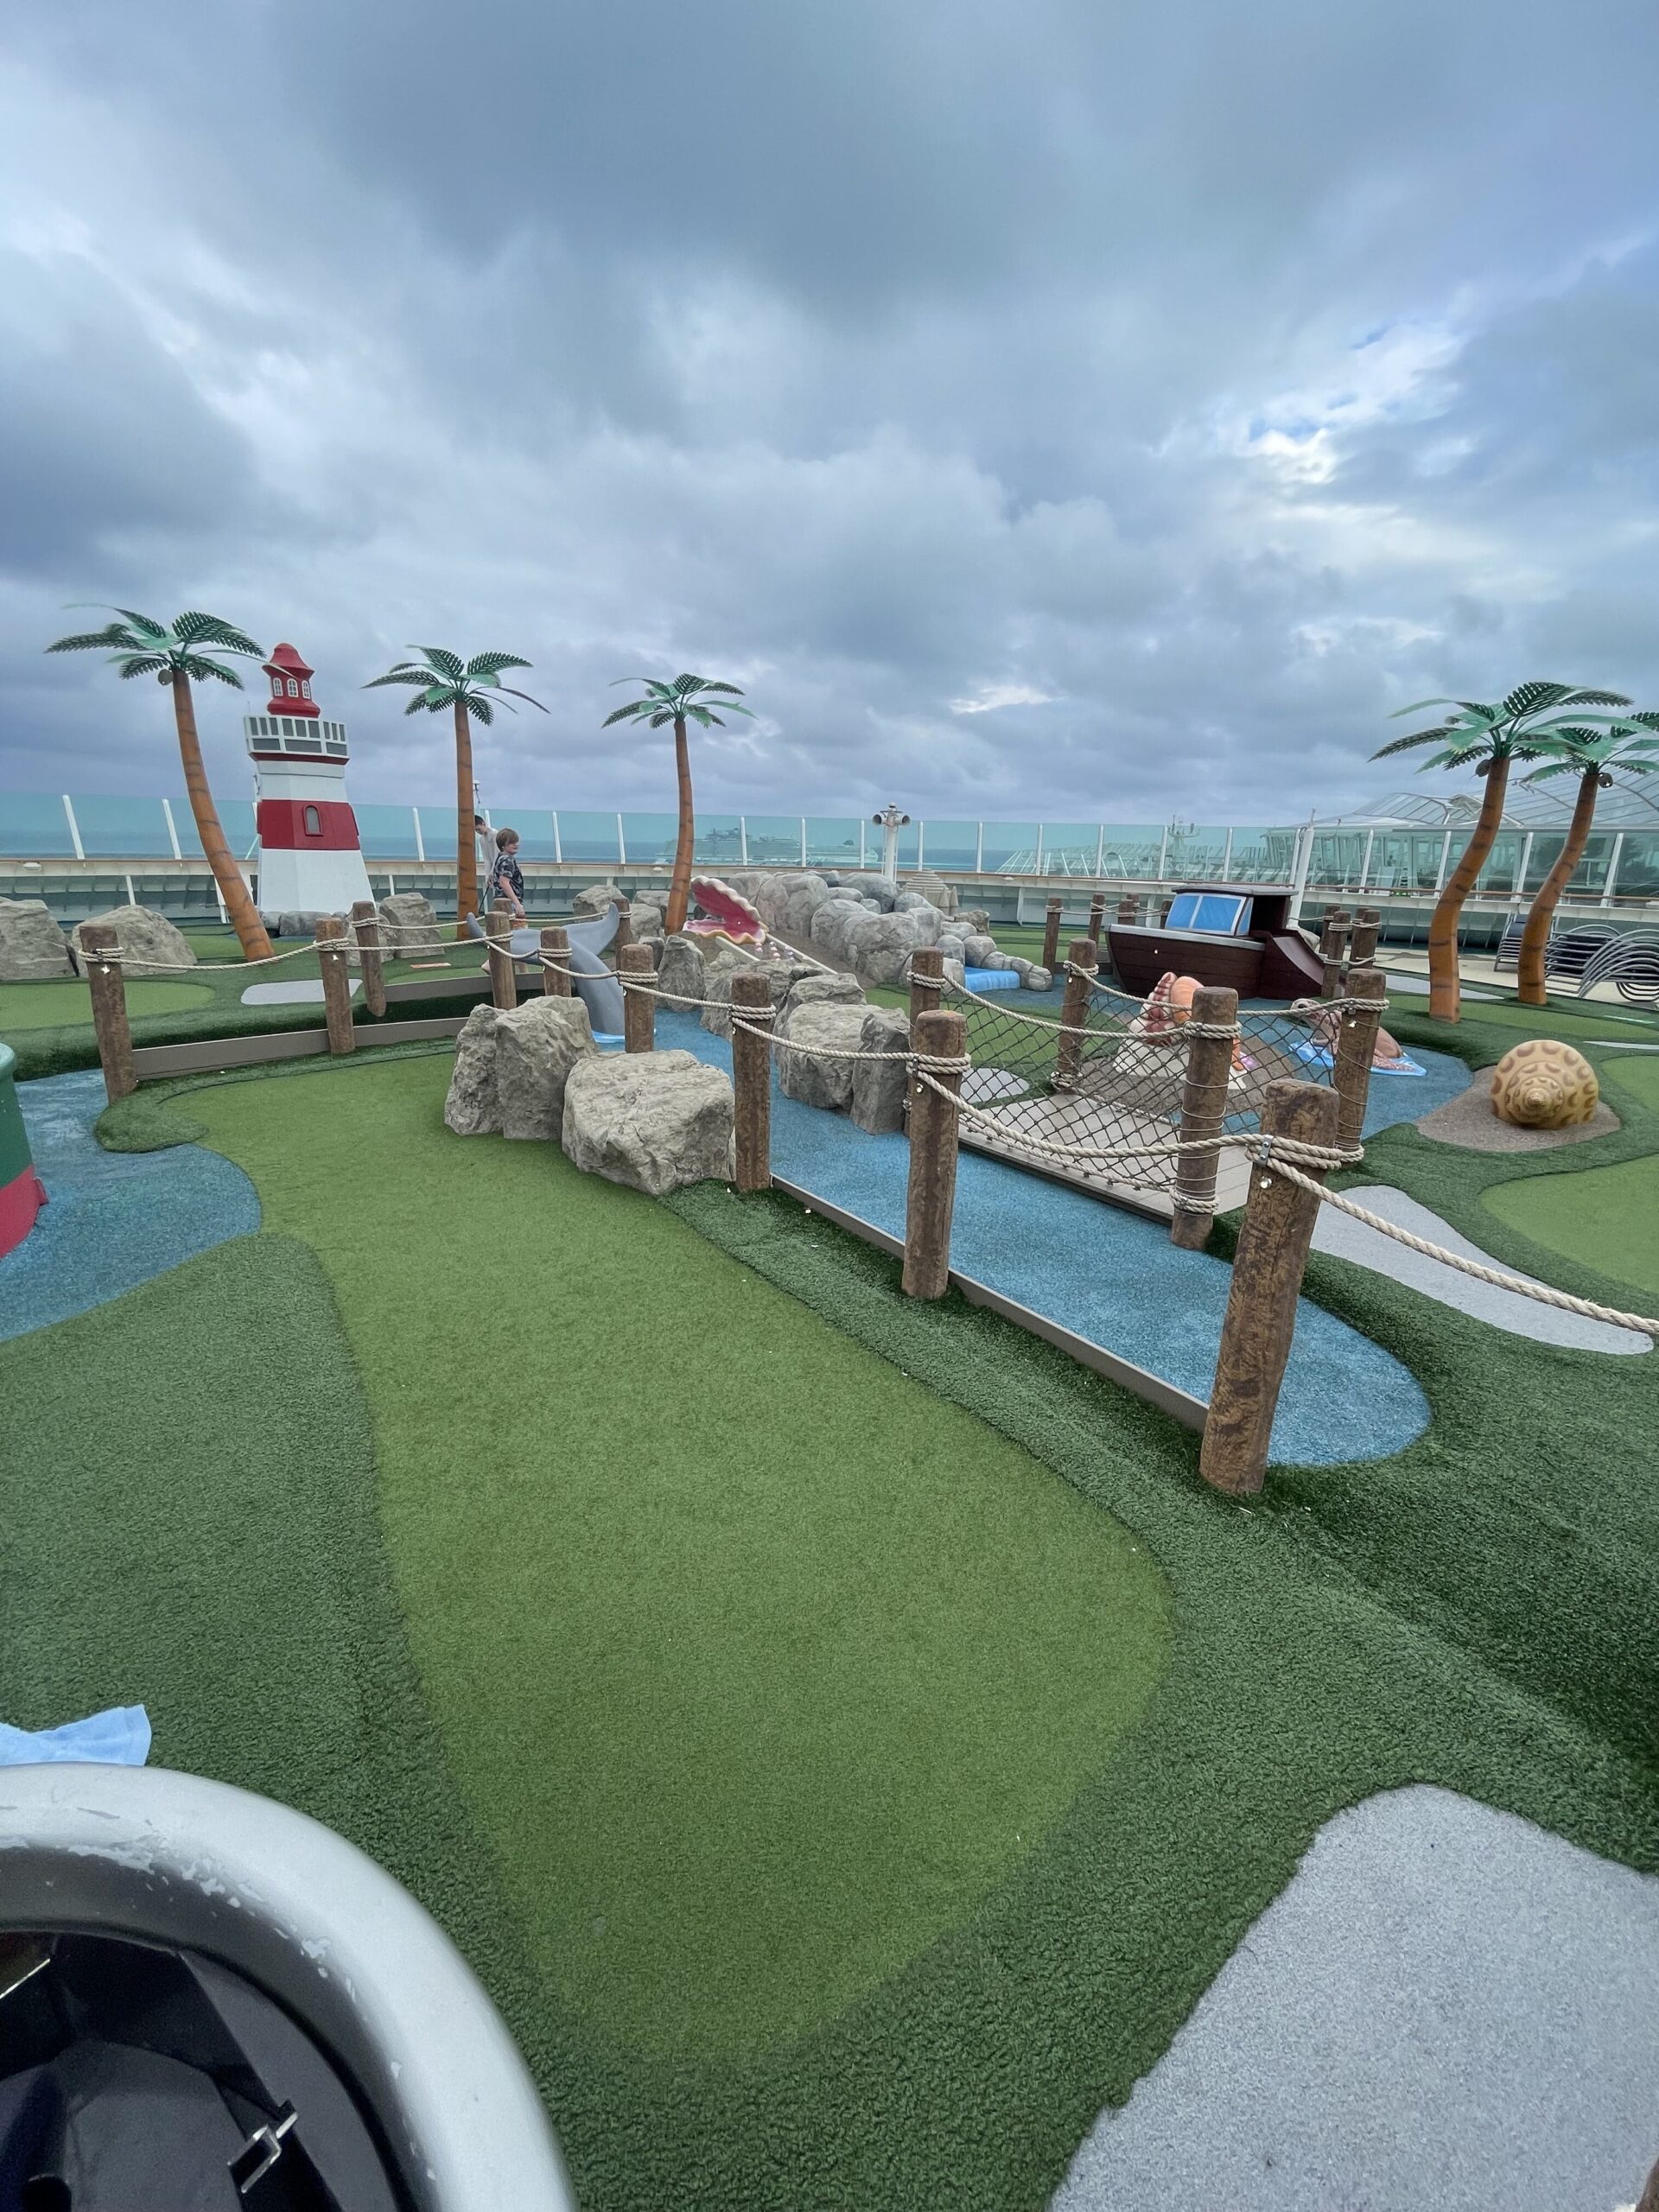 a miniature golf course with a bridge and palm trees